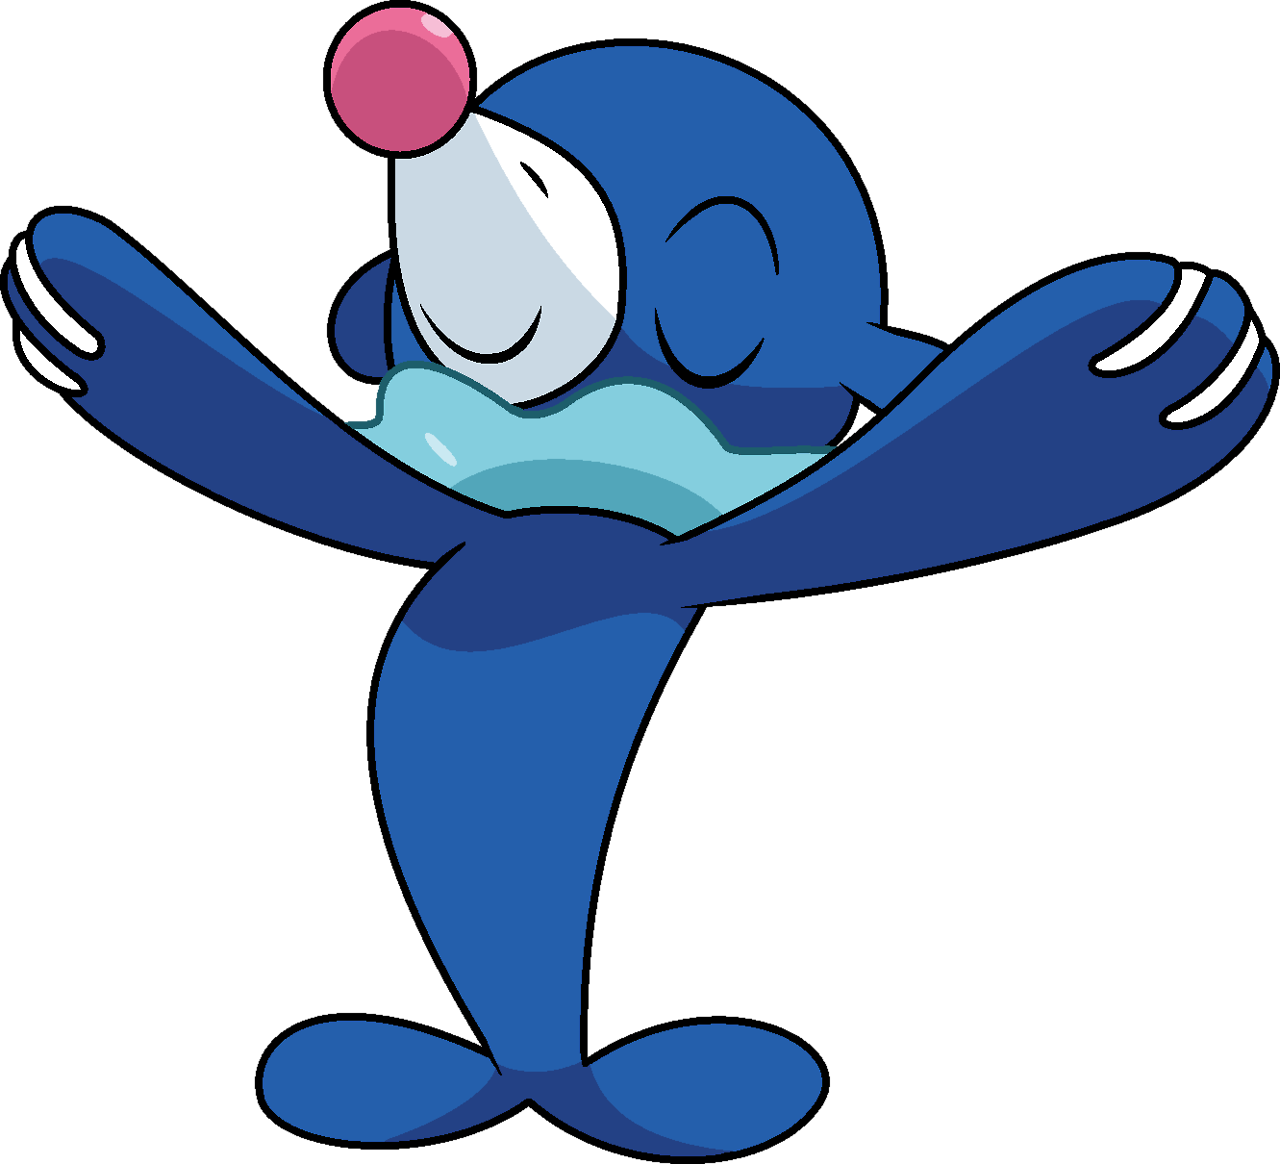 Popplio Pokemon PNG Images HD